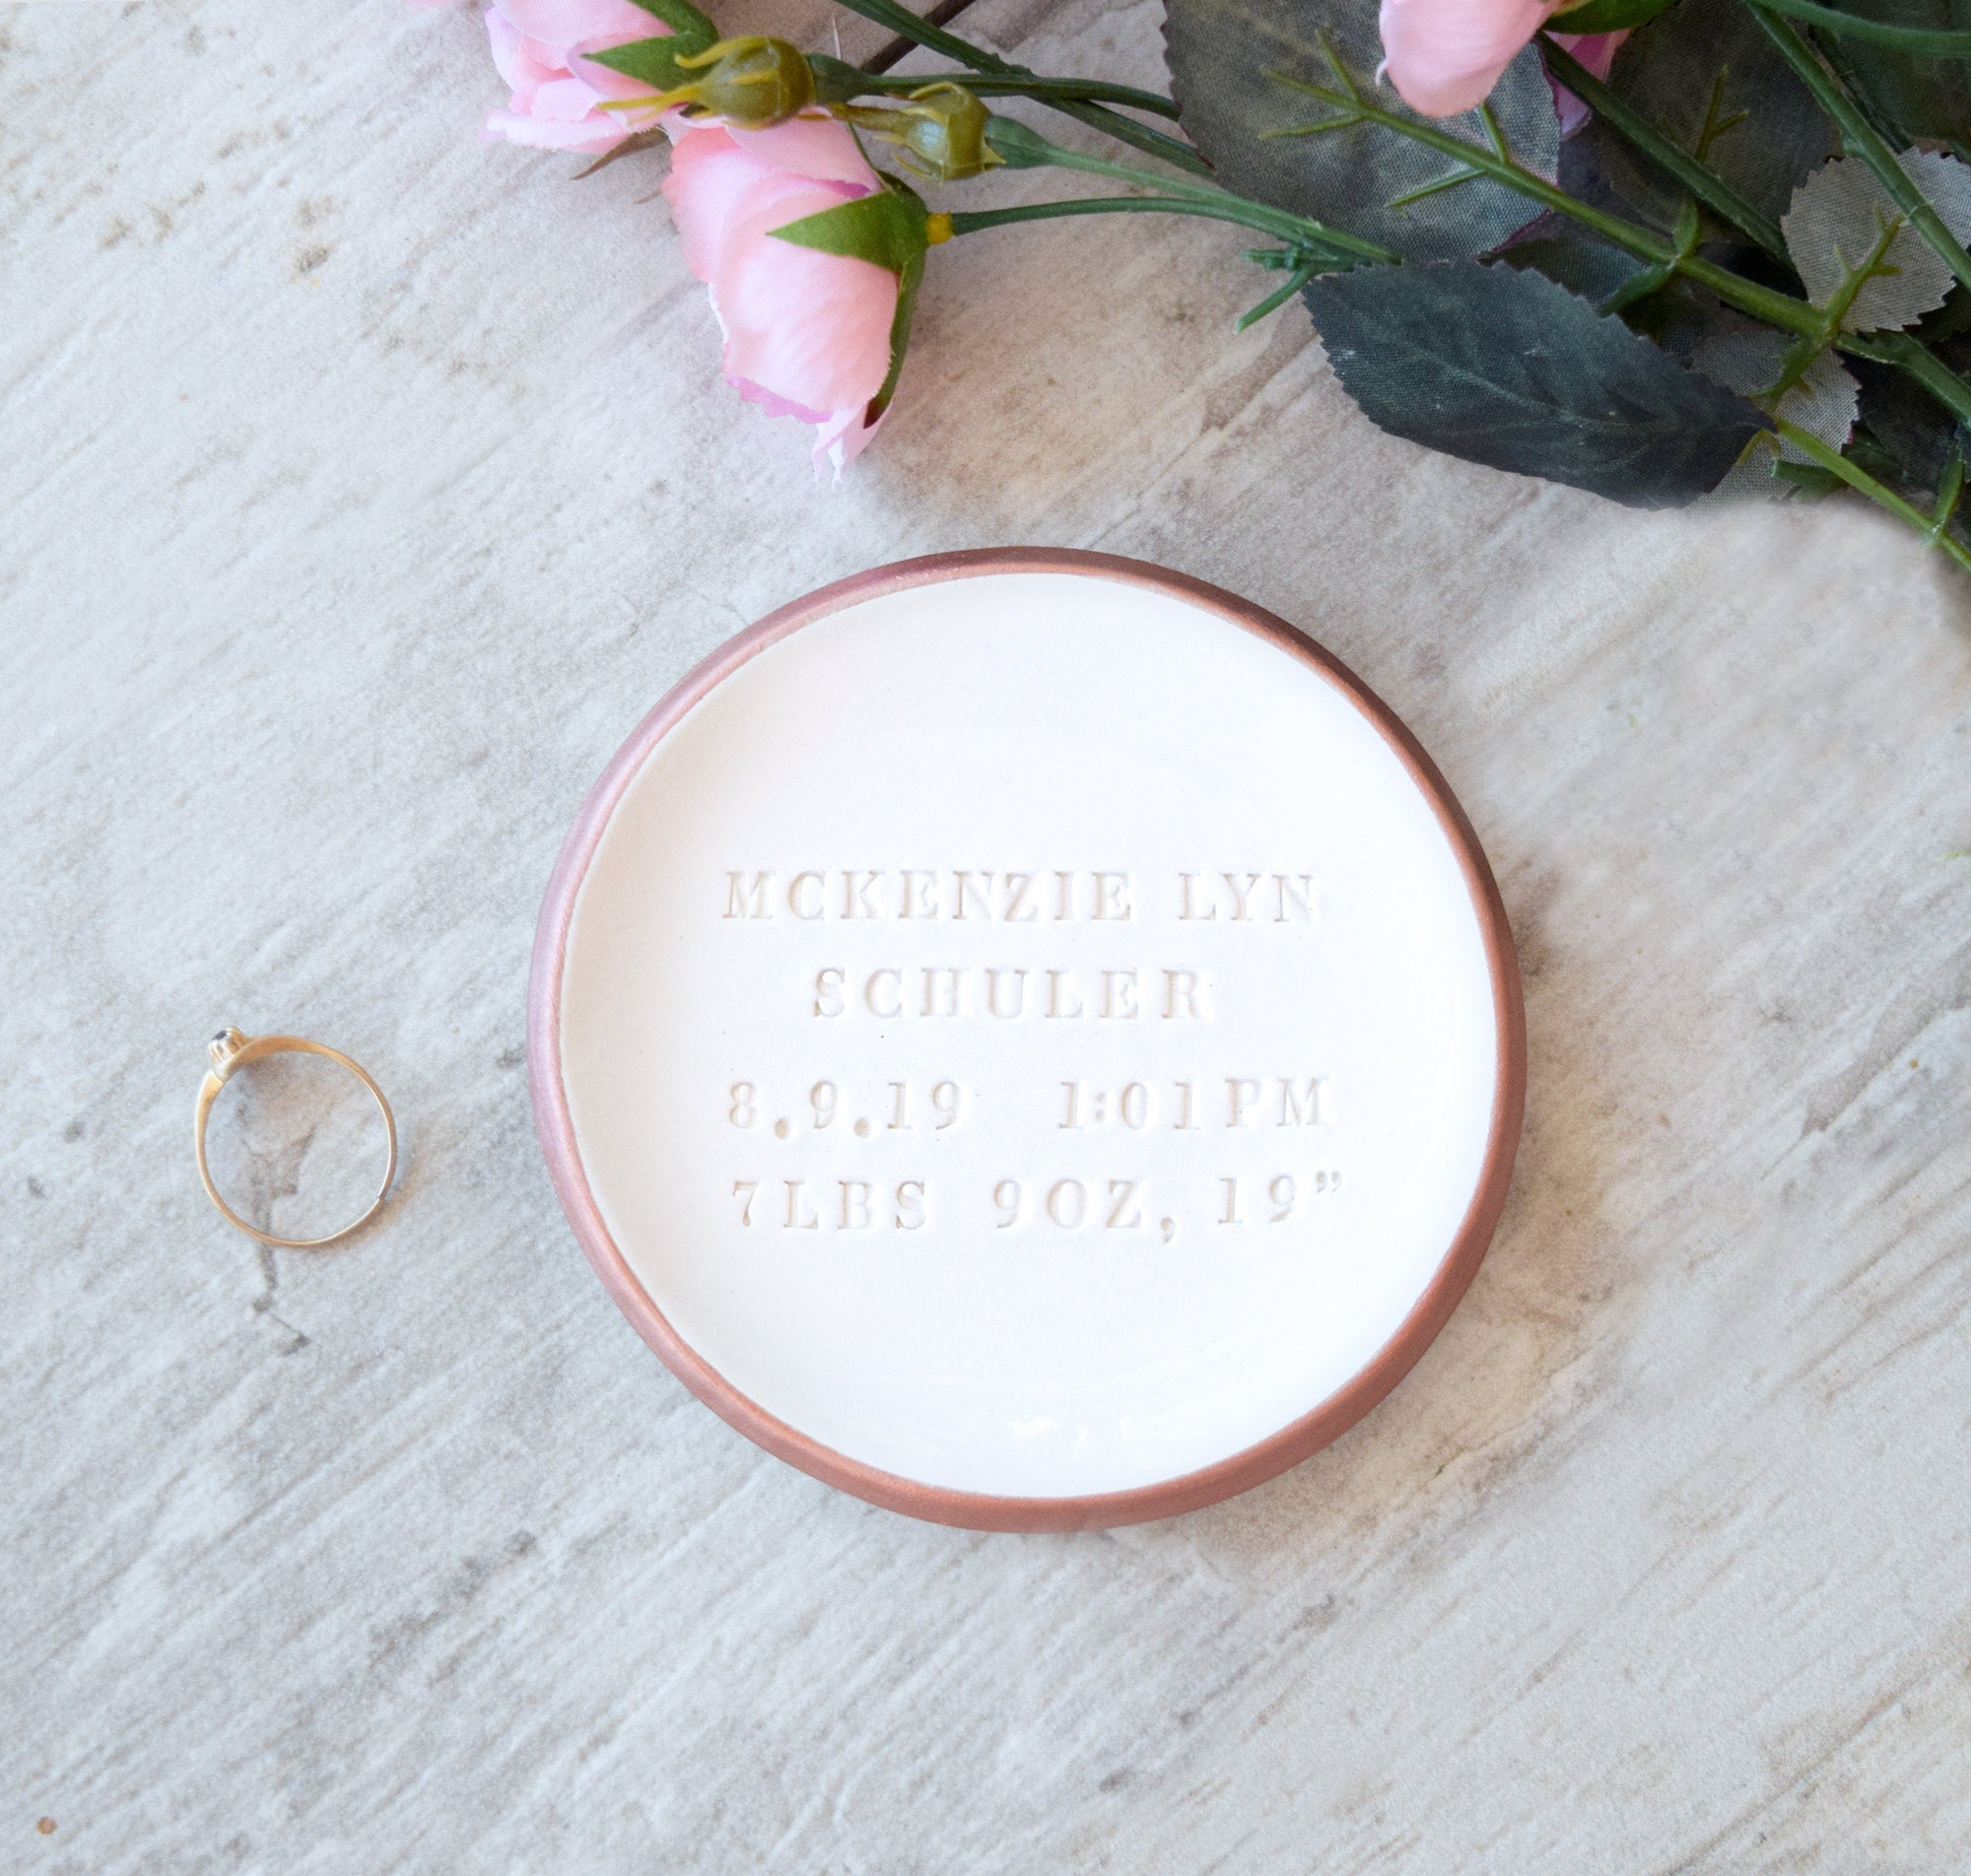 Personalized Keepsake Baby Photo and birth information Porcelain Plates –  The Photo Gift